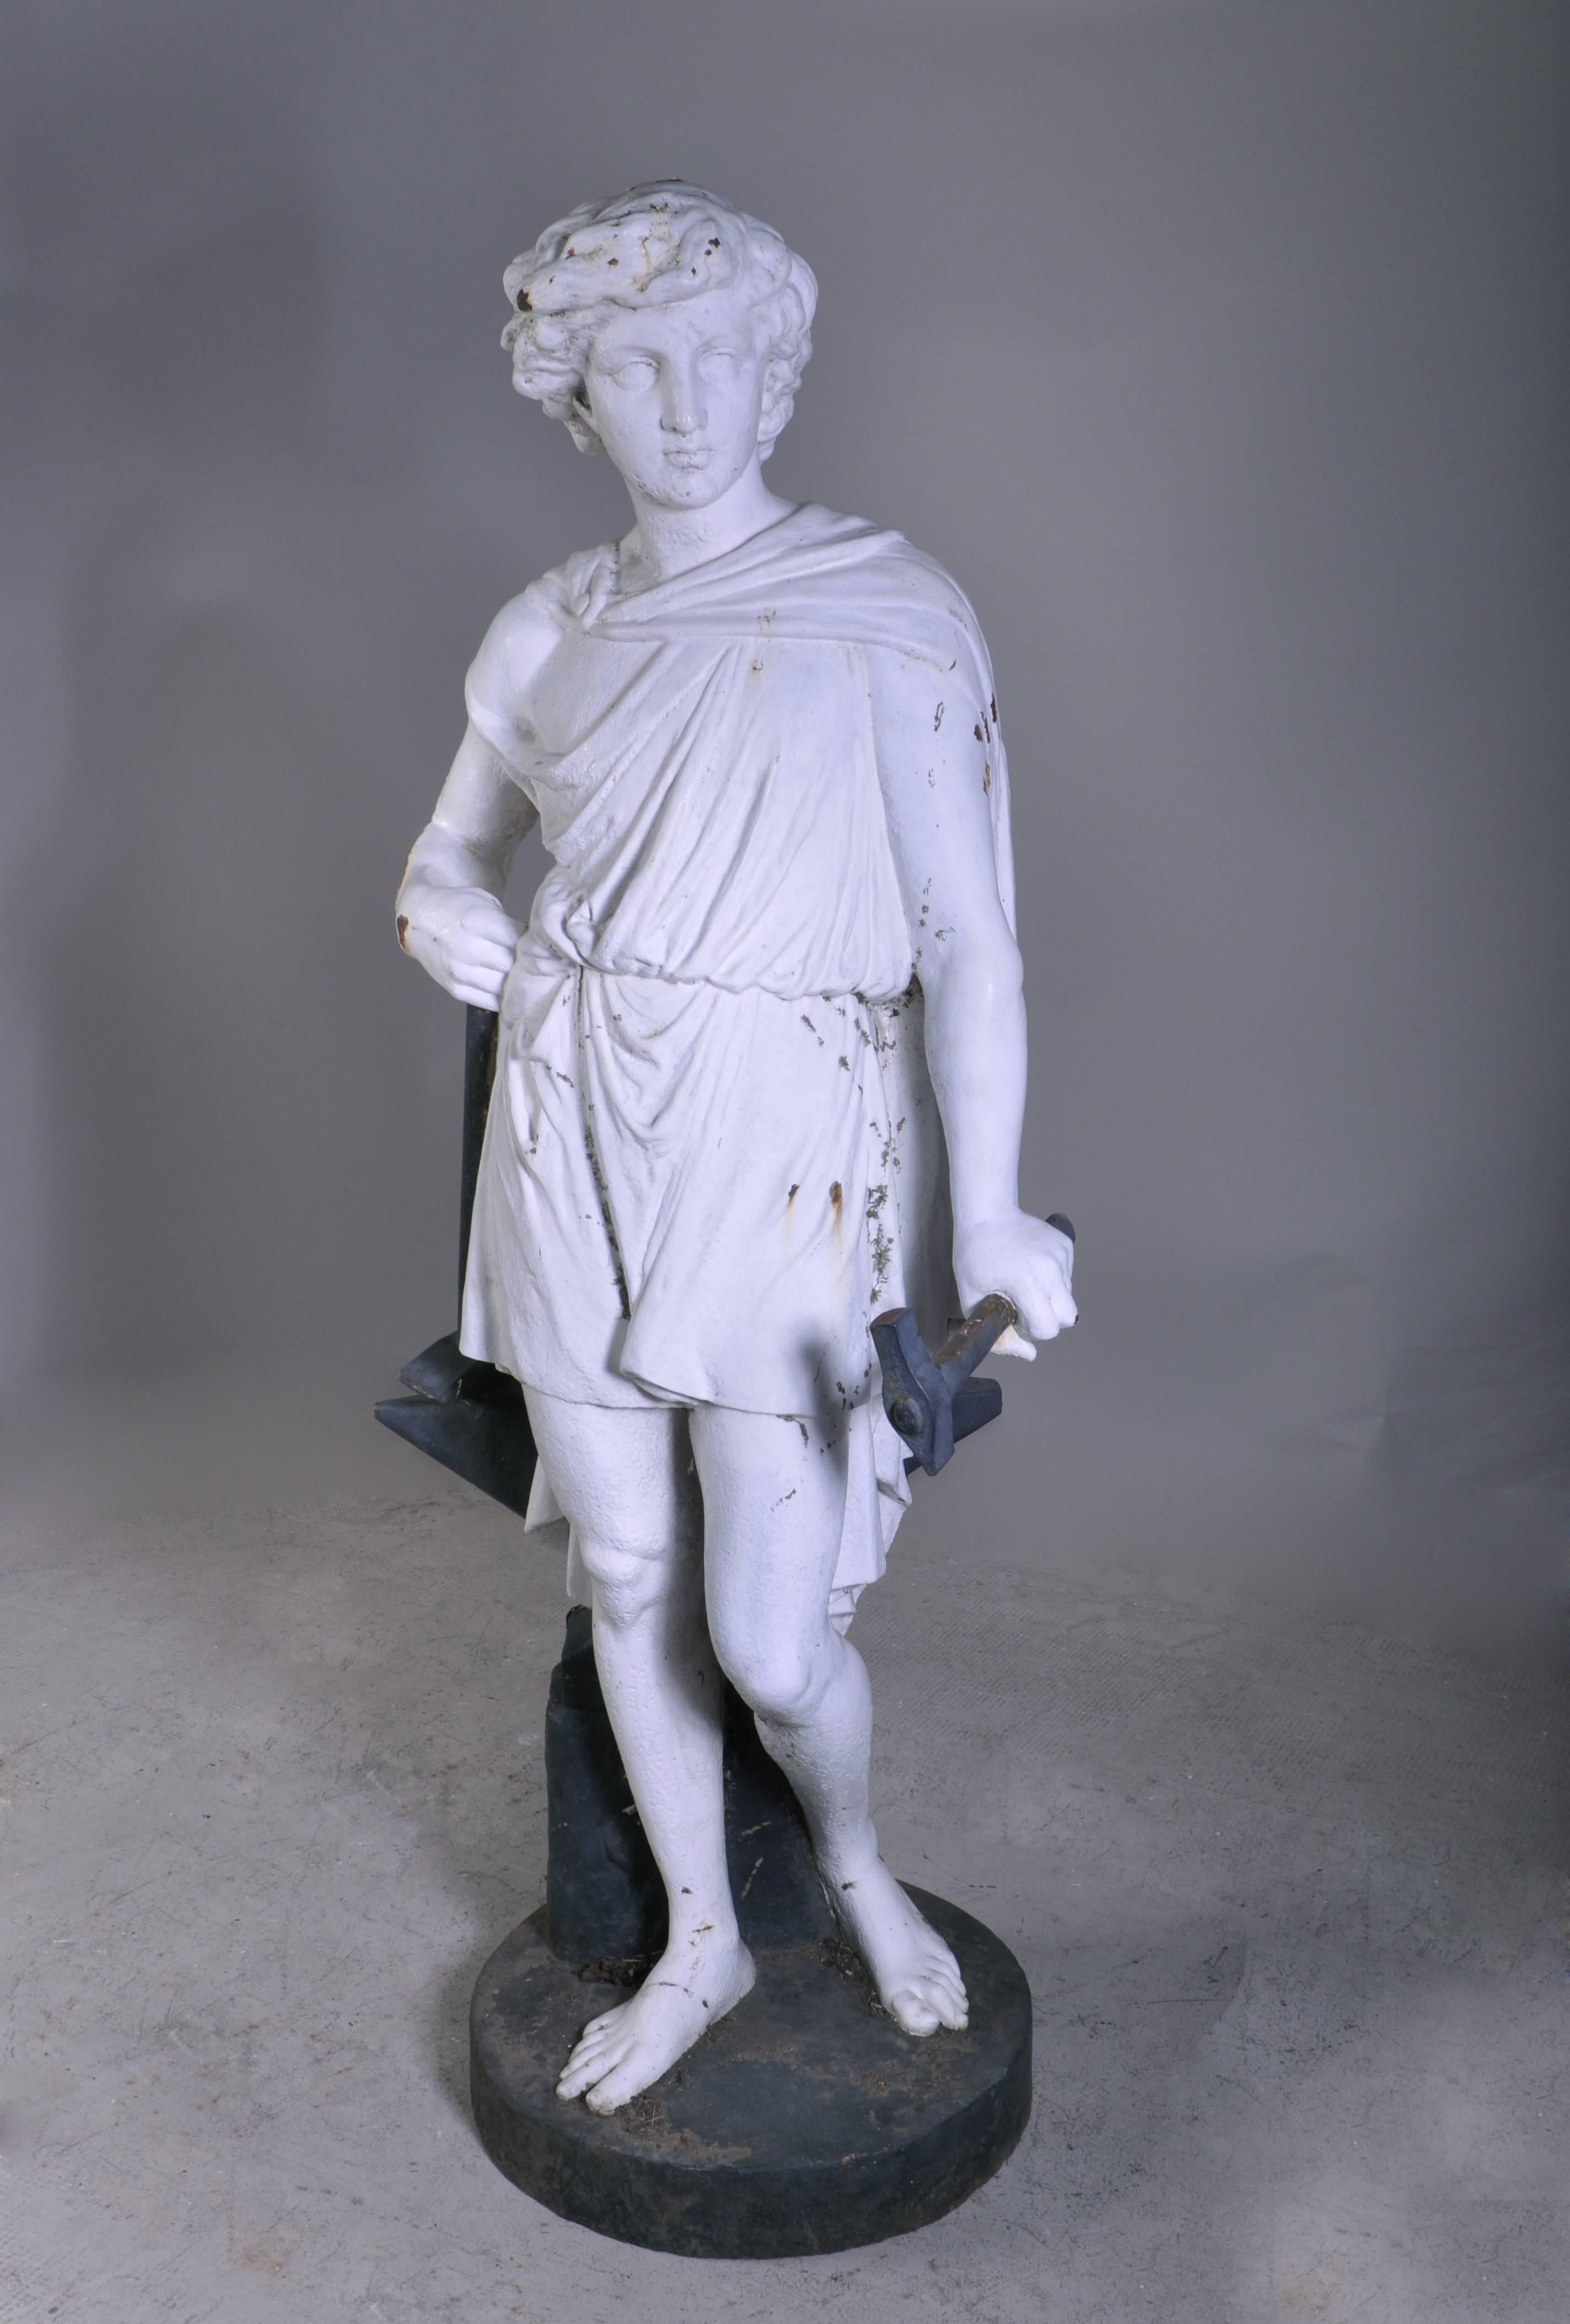 This antique 19th century cast iron statue was made after a model by Mathurin Moreau. This statue, called 